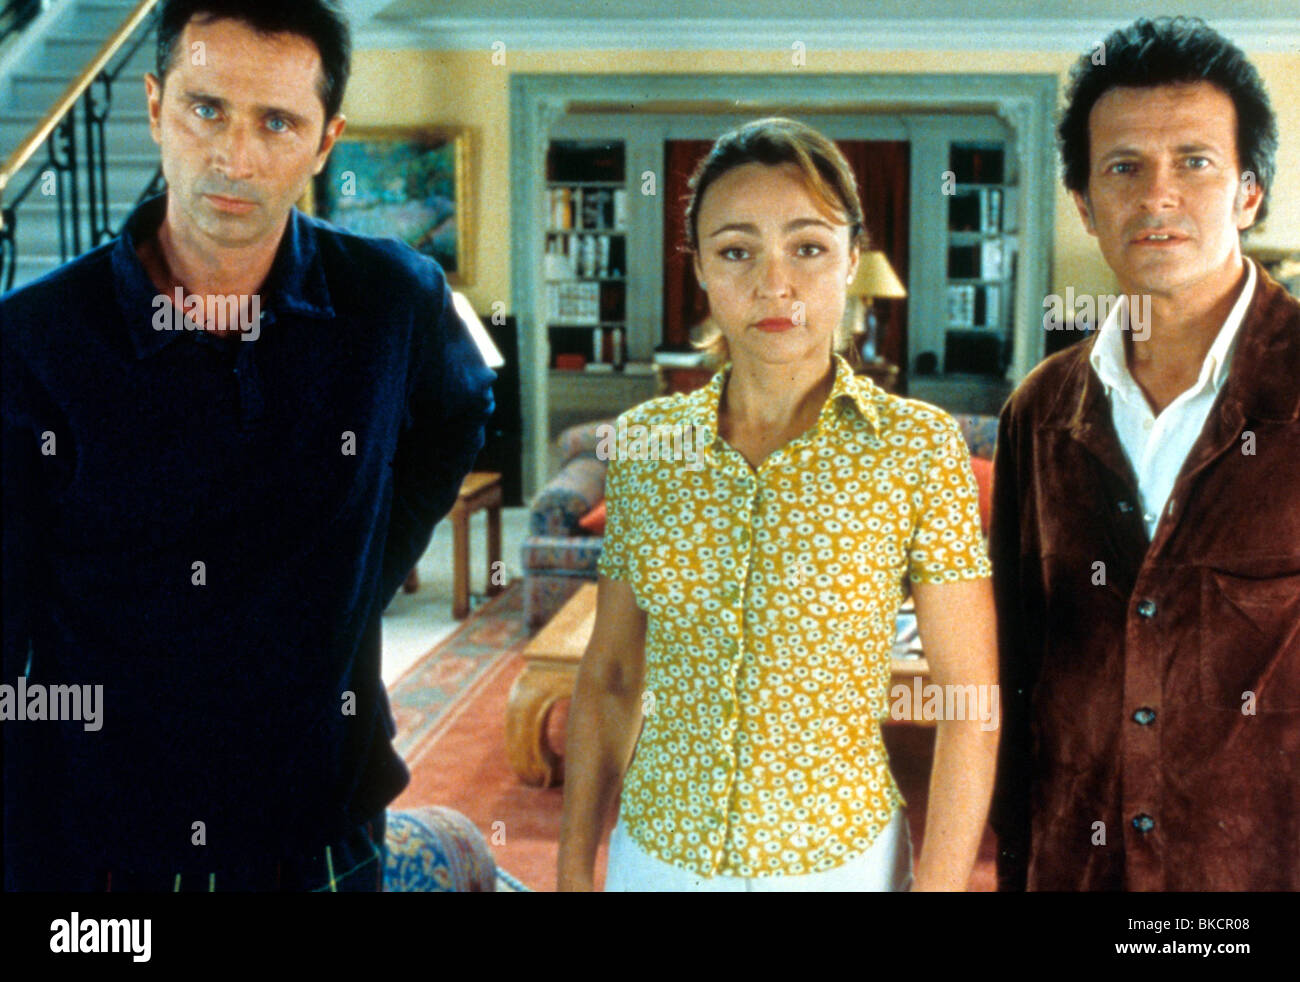 DAS DINNER GAME (1999) LE DINER DE CONS (ALT) THIERRY LHERMITTE, CATHERINE FROT, FRANCIS HUSTER DNNG 004 Stockfoto